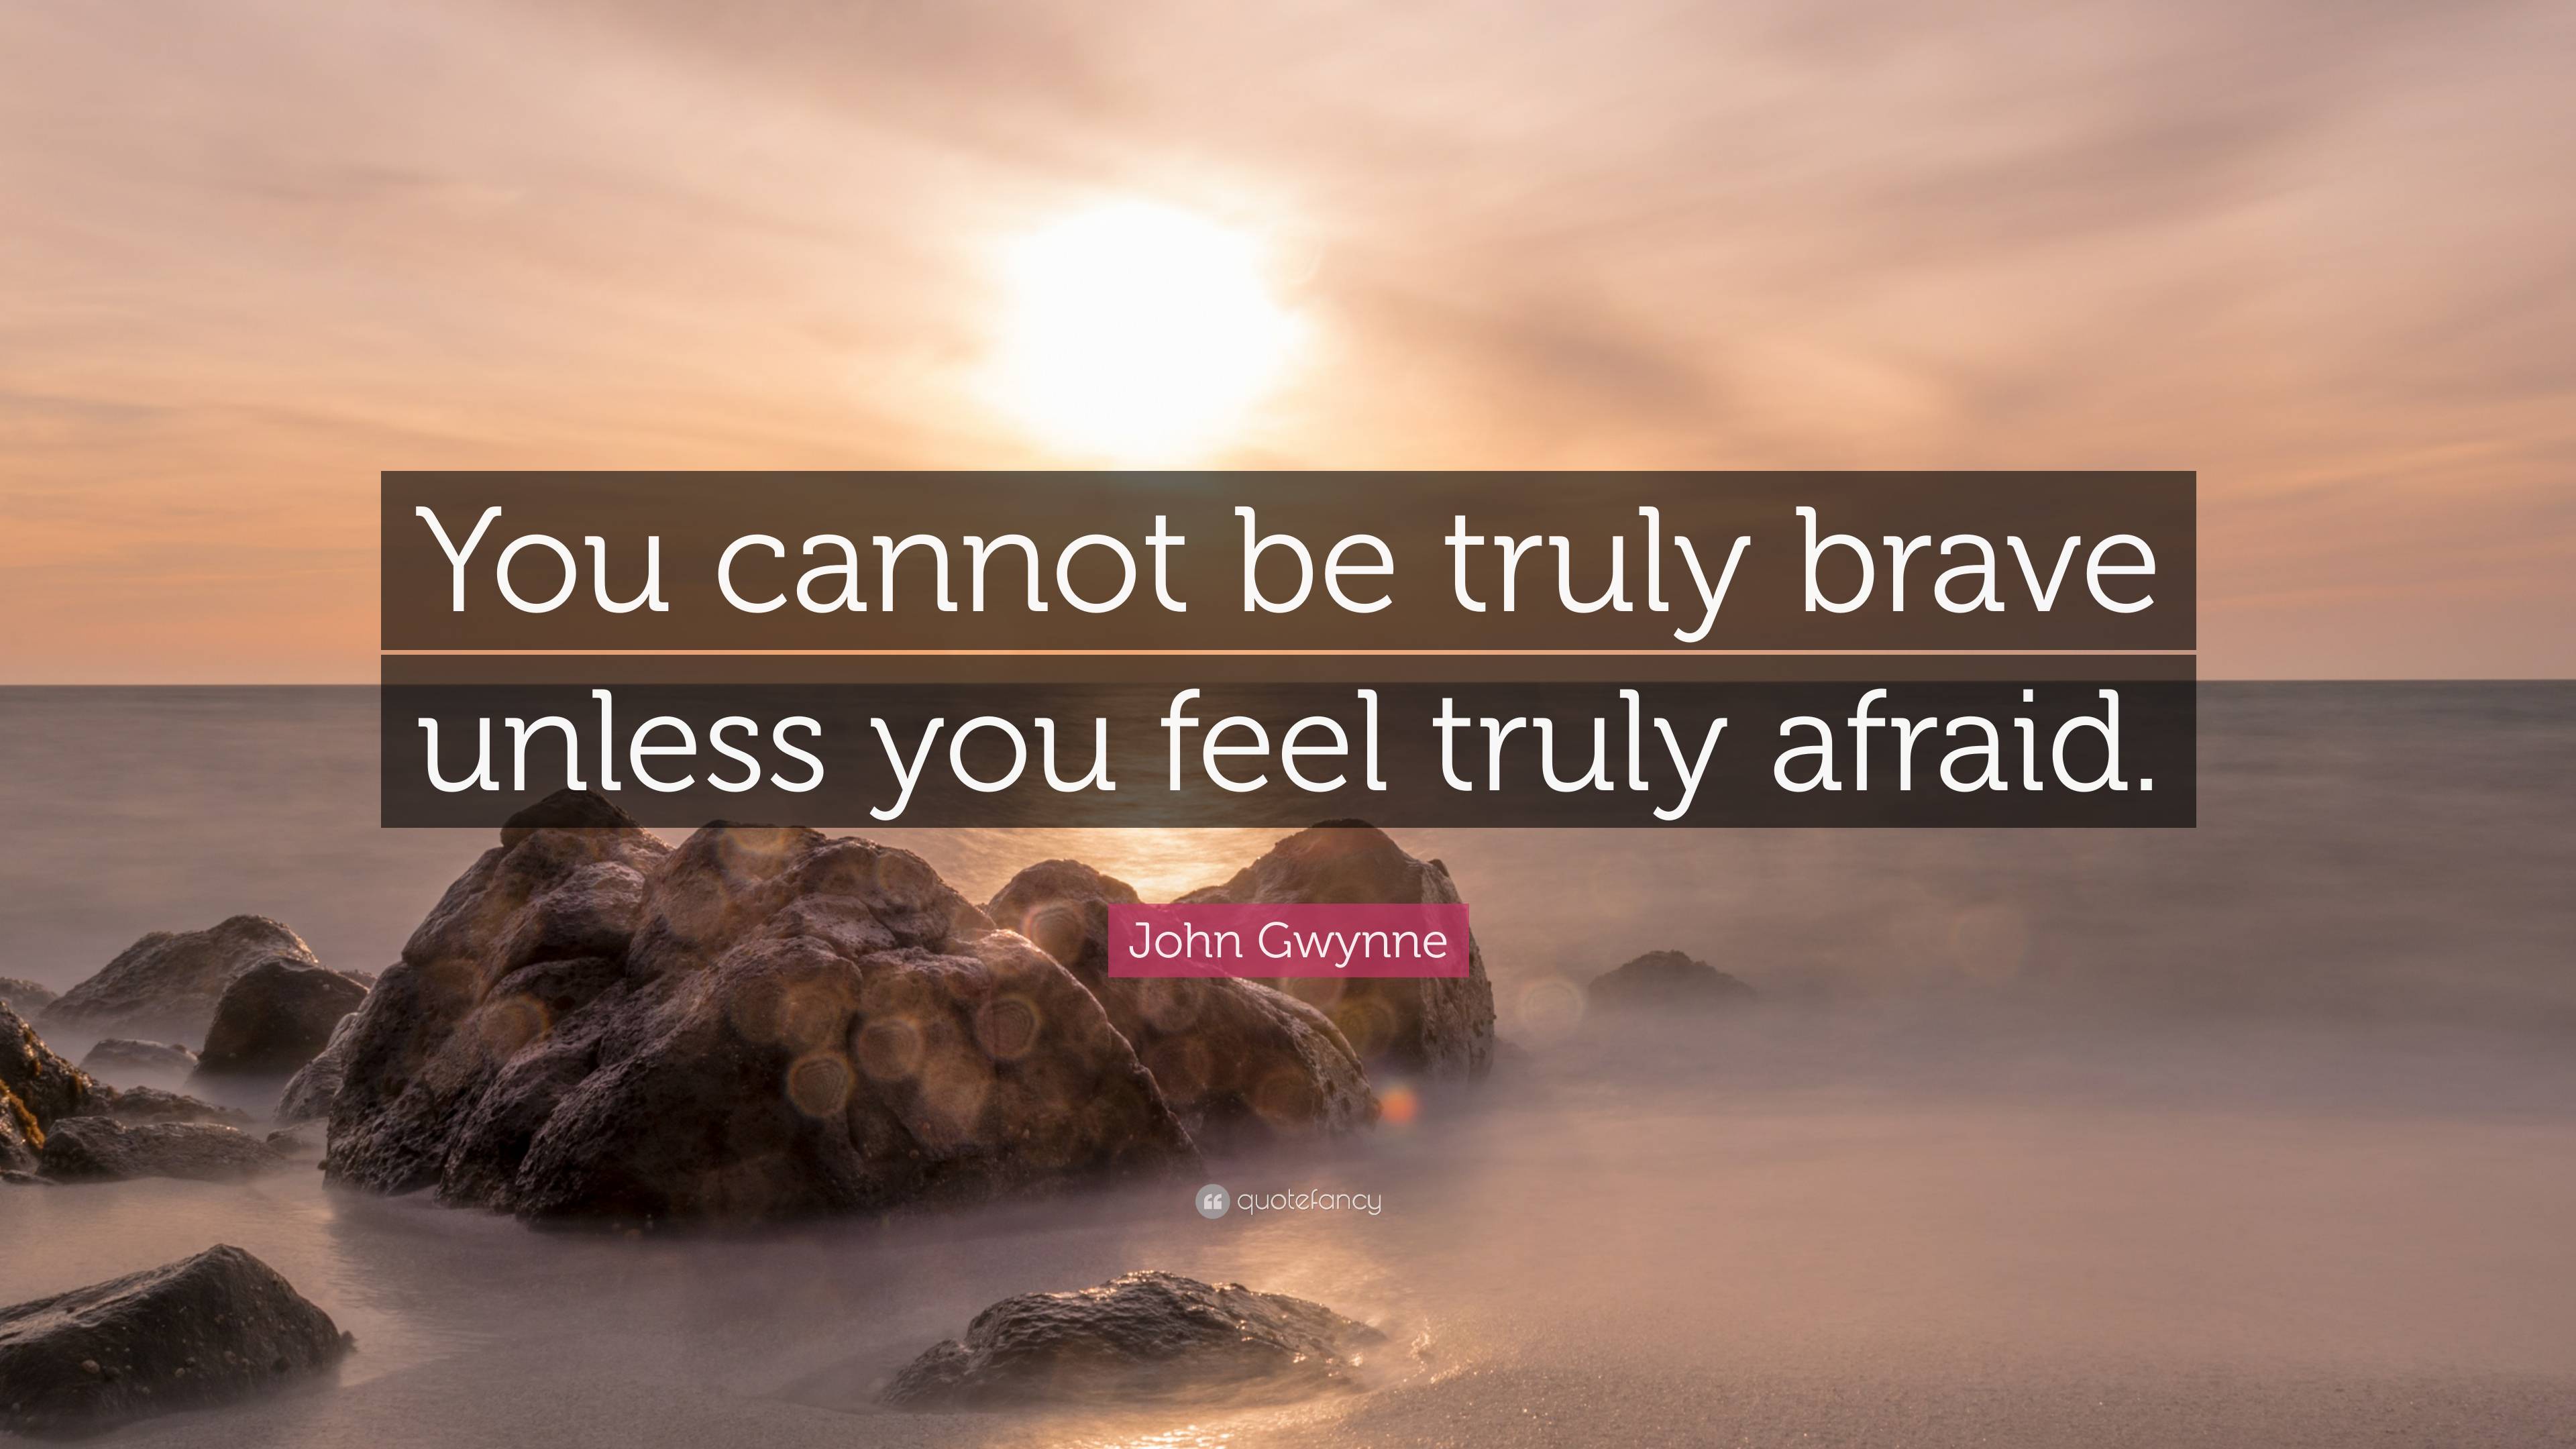 John Gwynne Quote: “You cannot be truly brave unless you feel truly ...